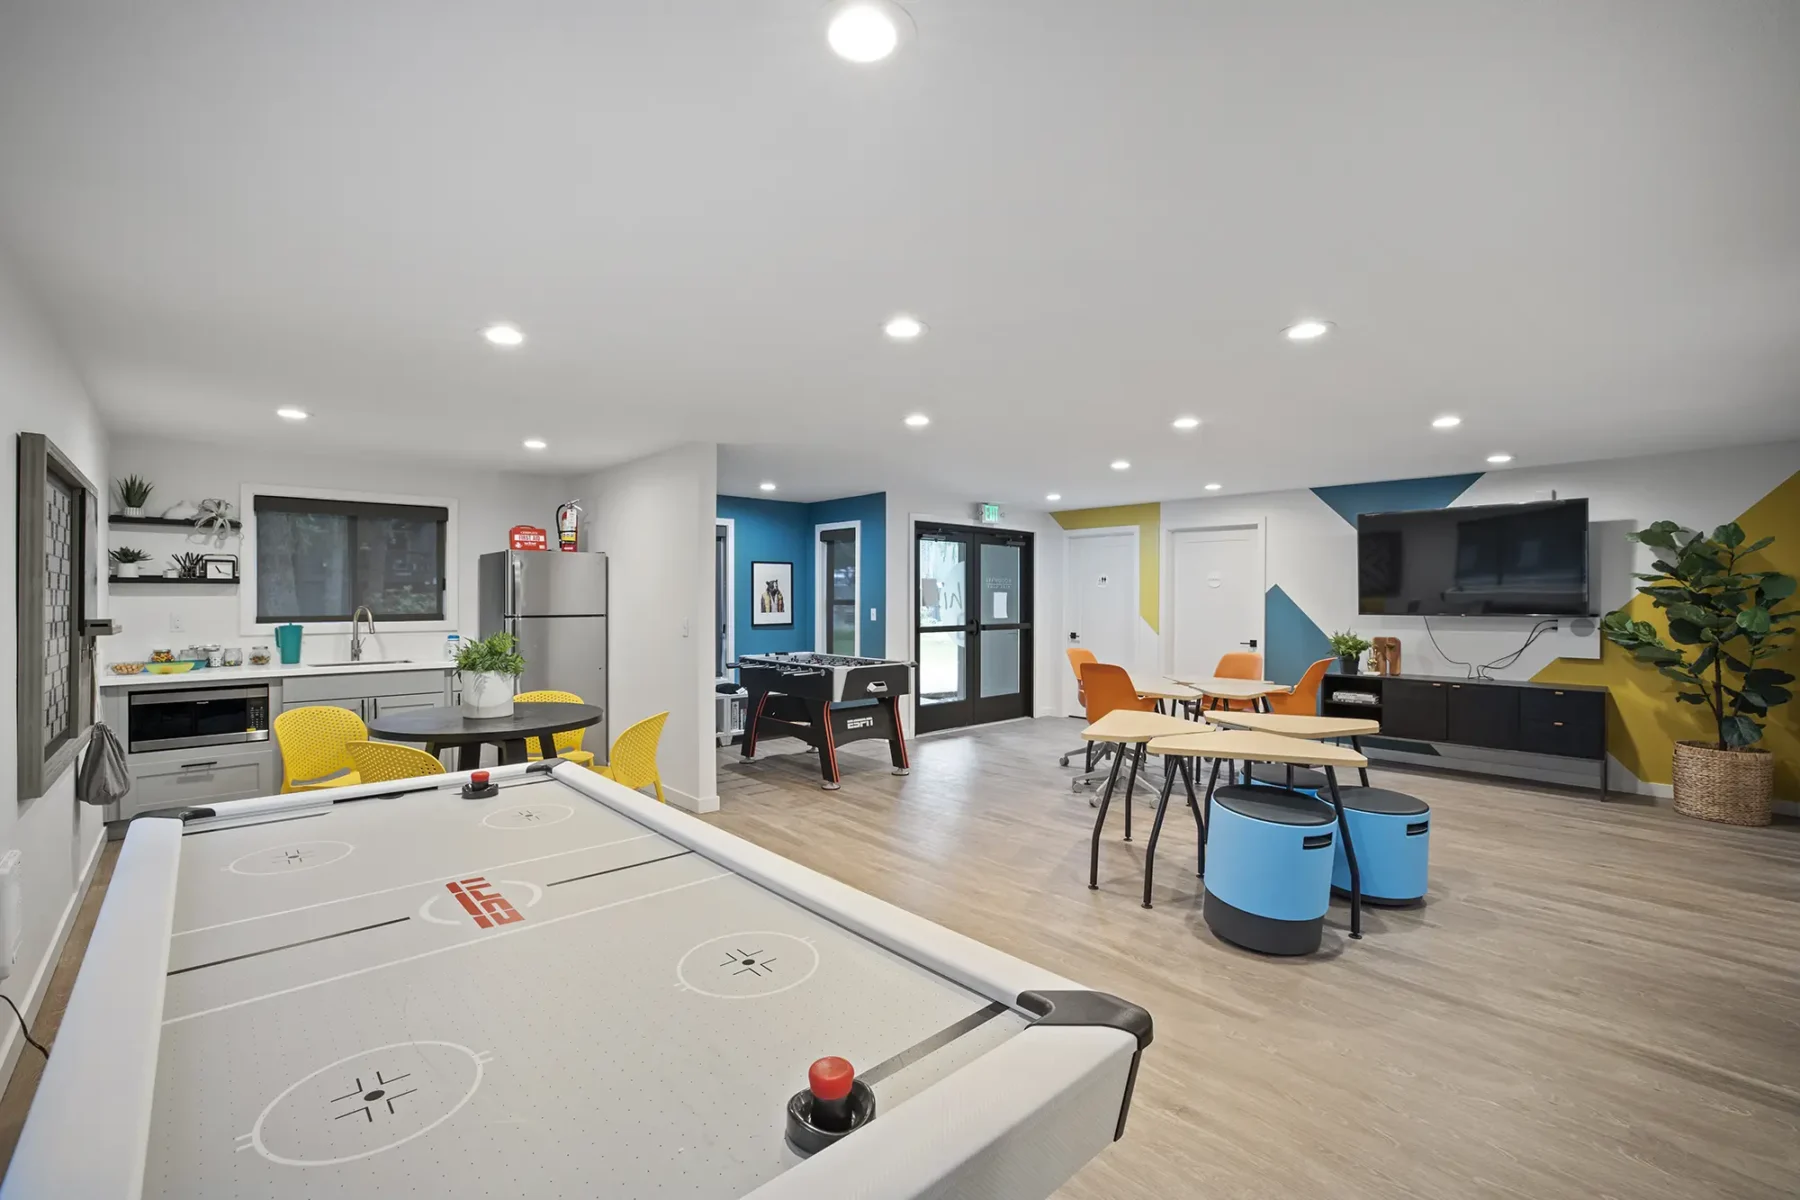 Clubhouse game room with foosball, air hockey, and kitchenette